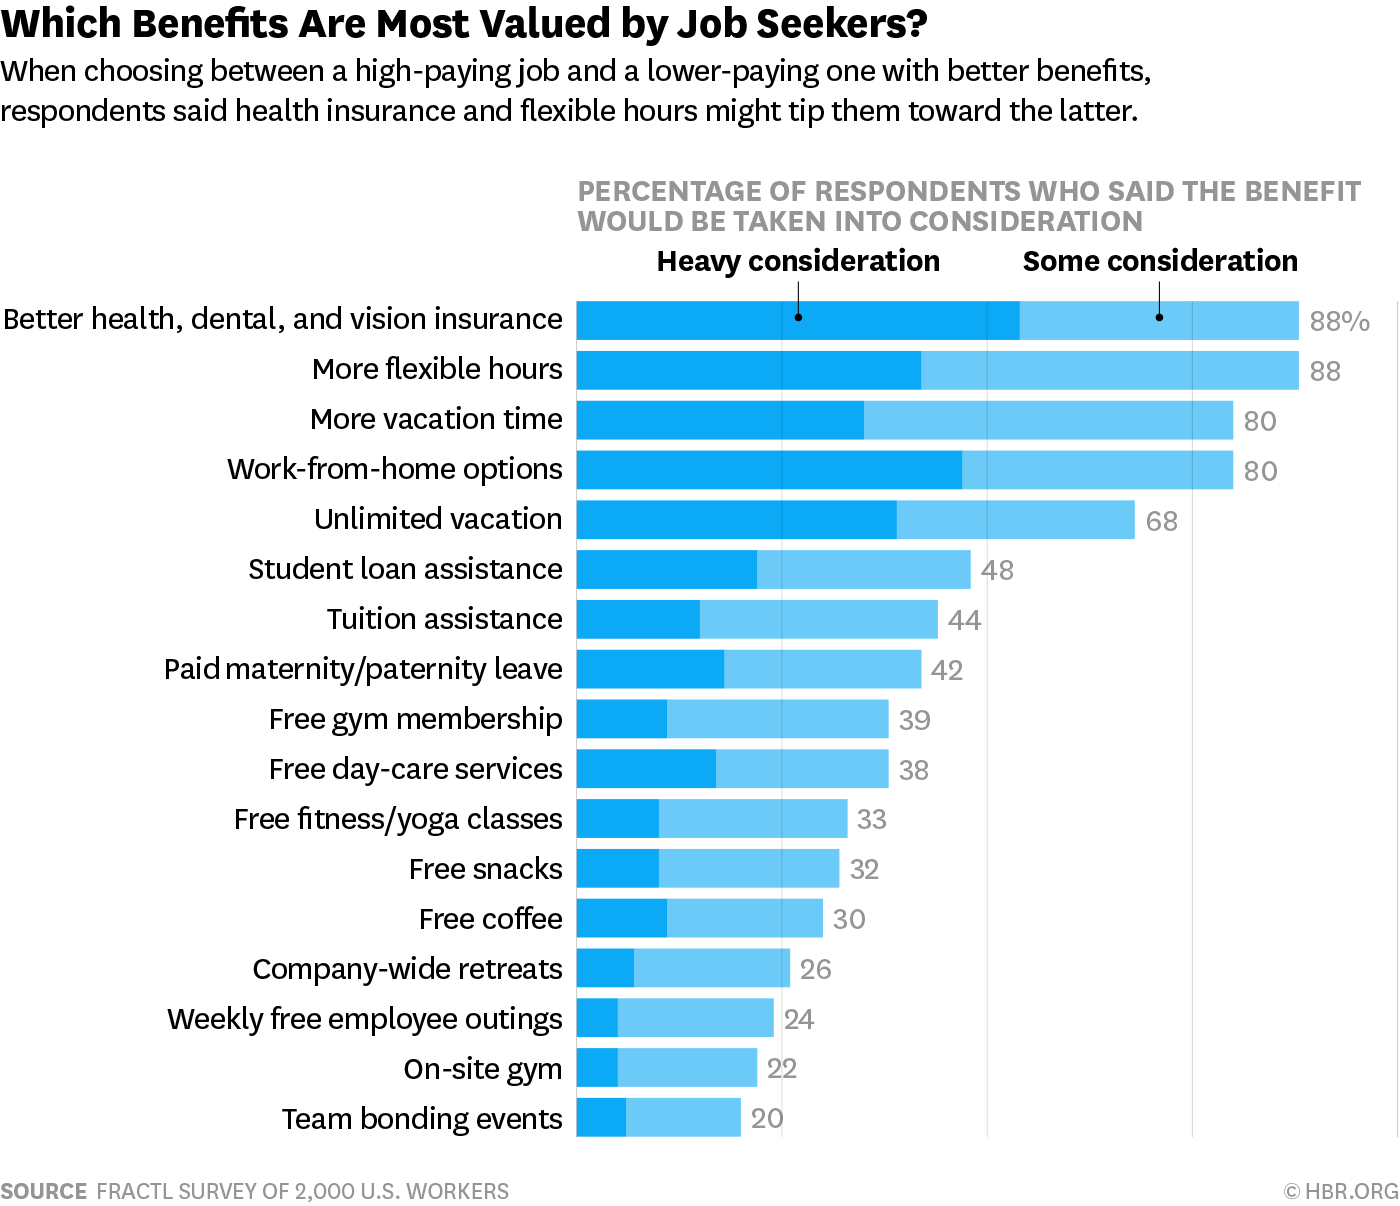 Some of the benefits valued most by job seekers.